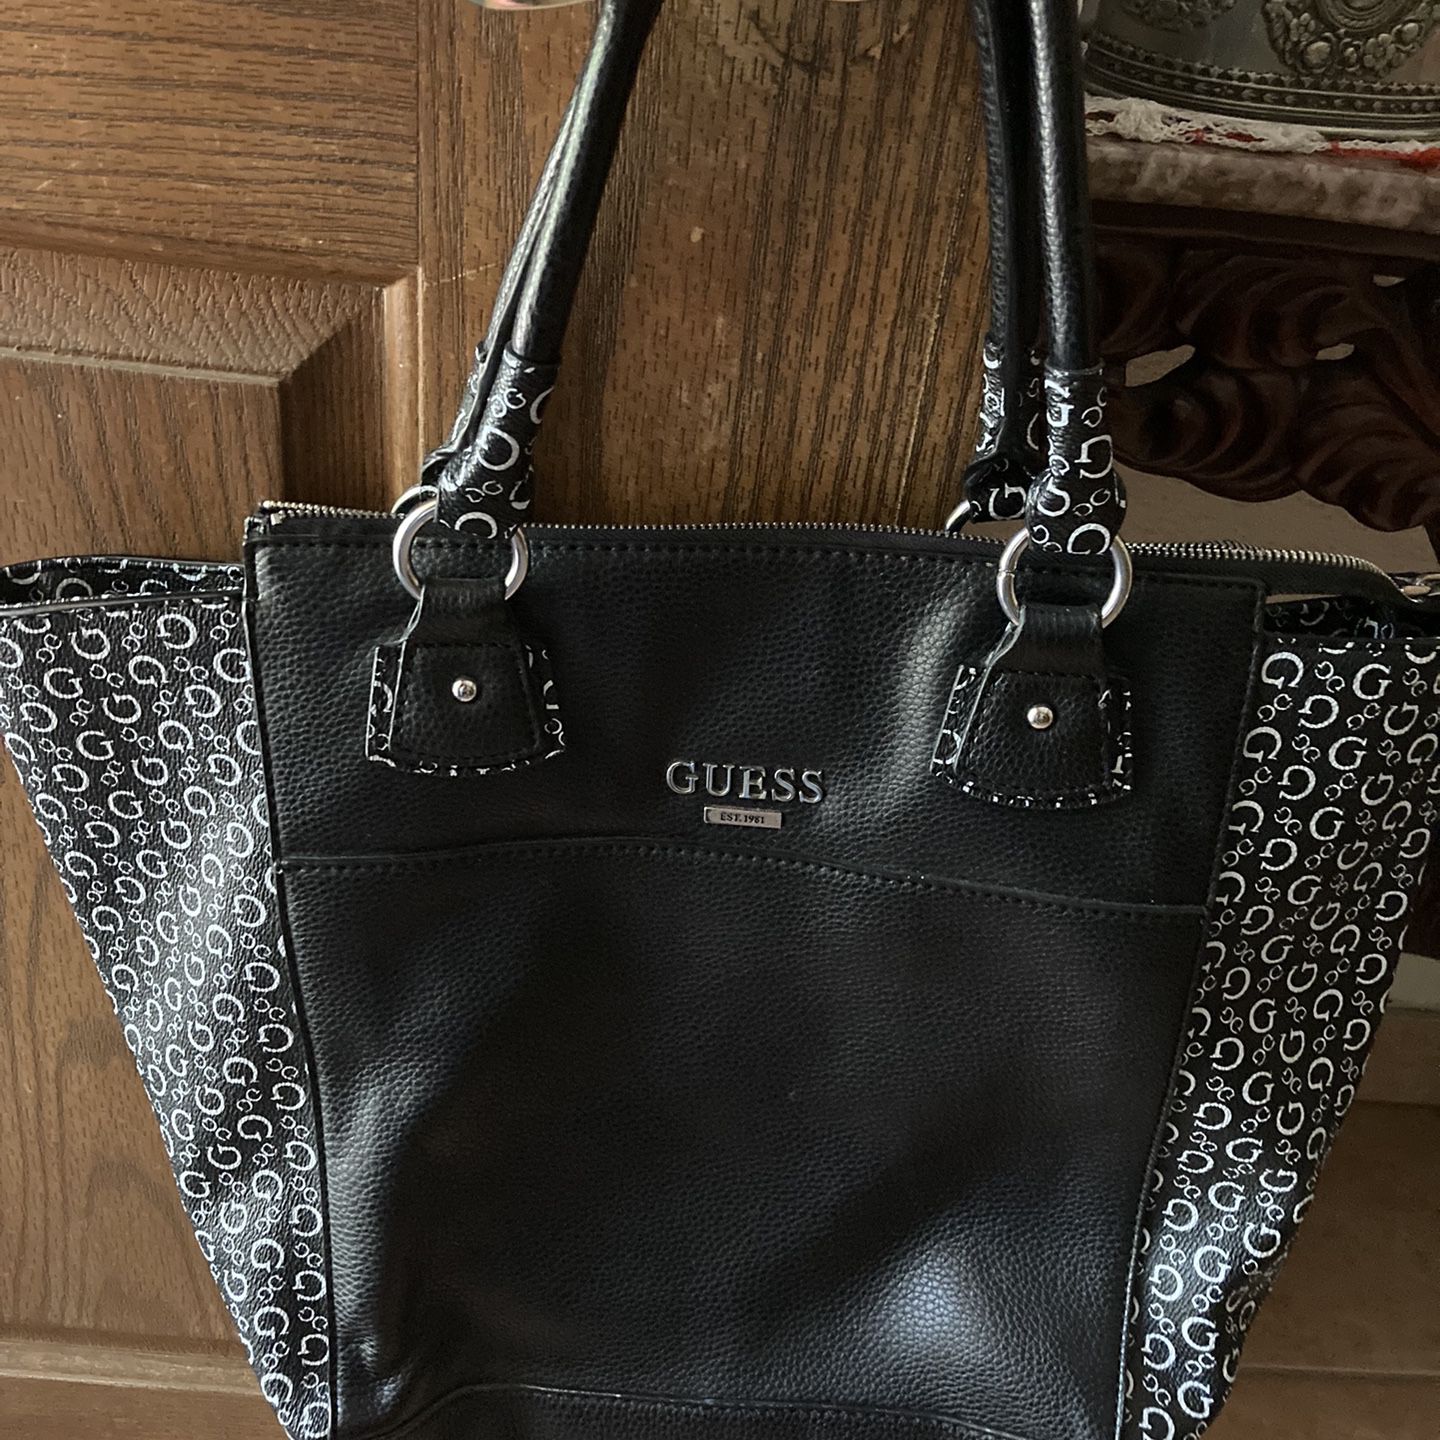 hand bags / purses for Sale in Fresno, CA - OfferUp